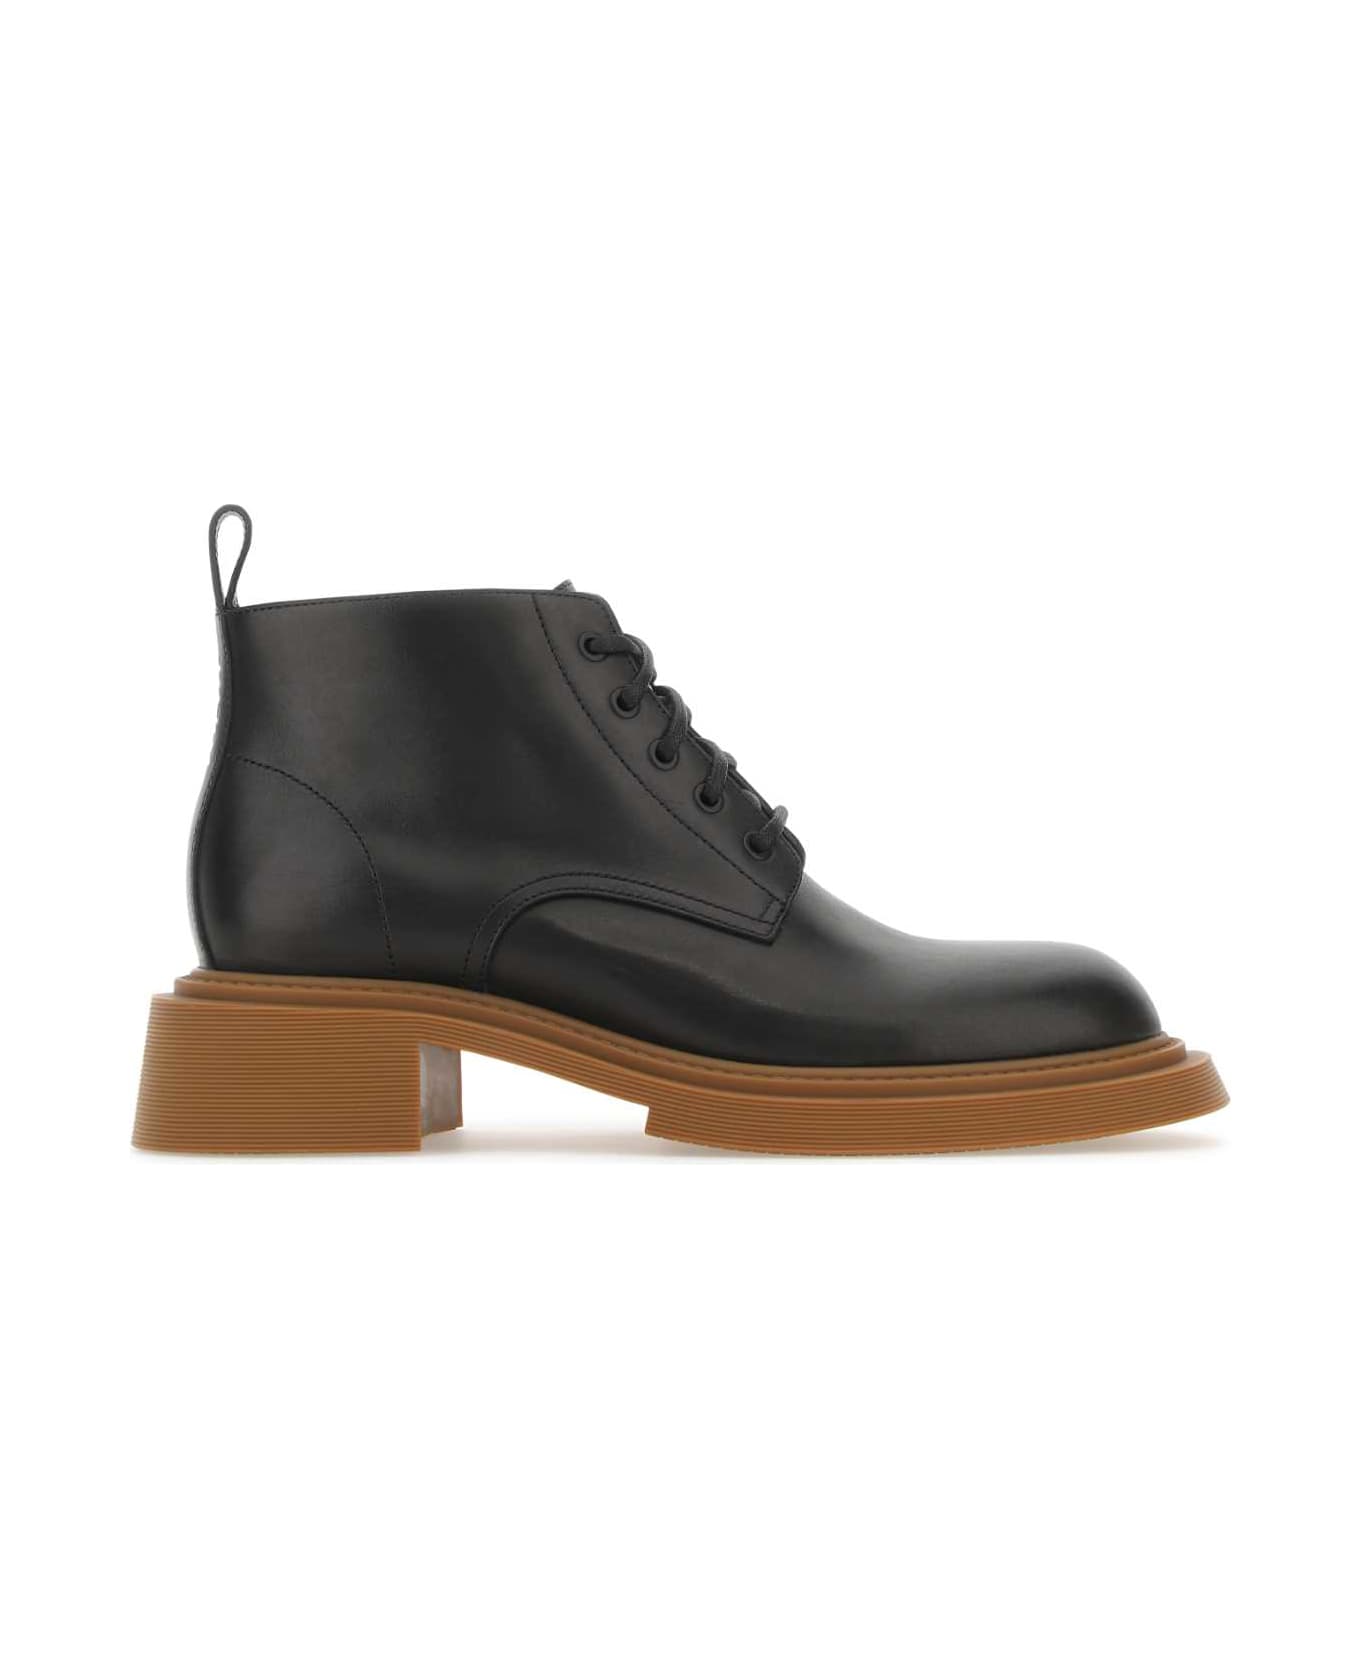 Loewe Black Leather Ankle Boots - BLACK ブーツ